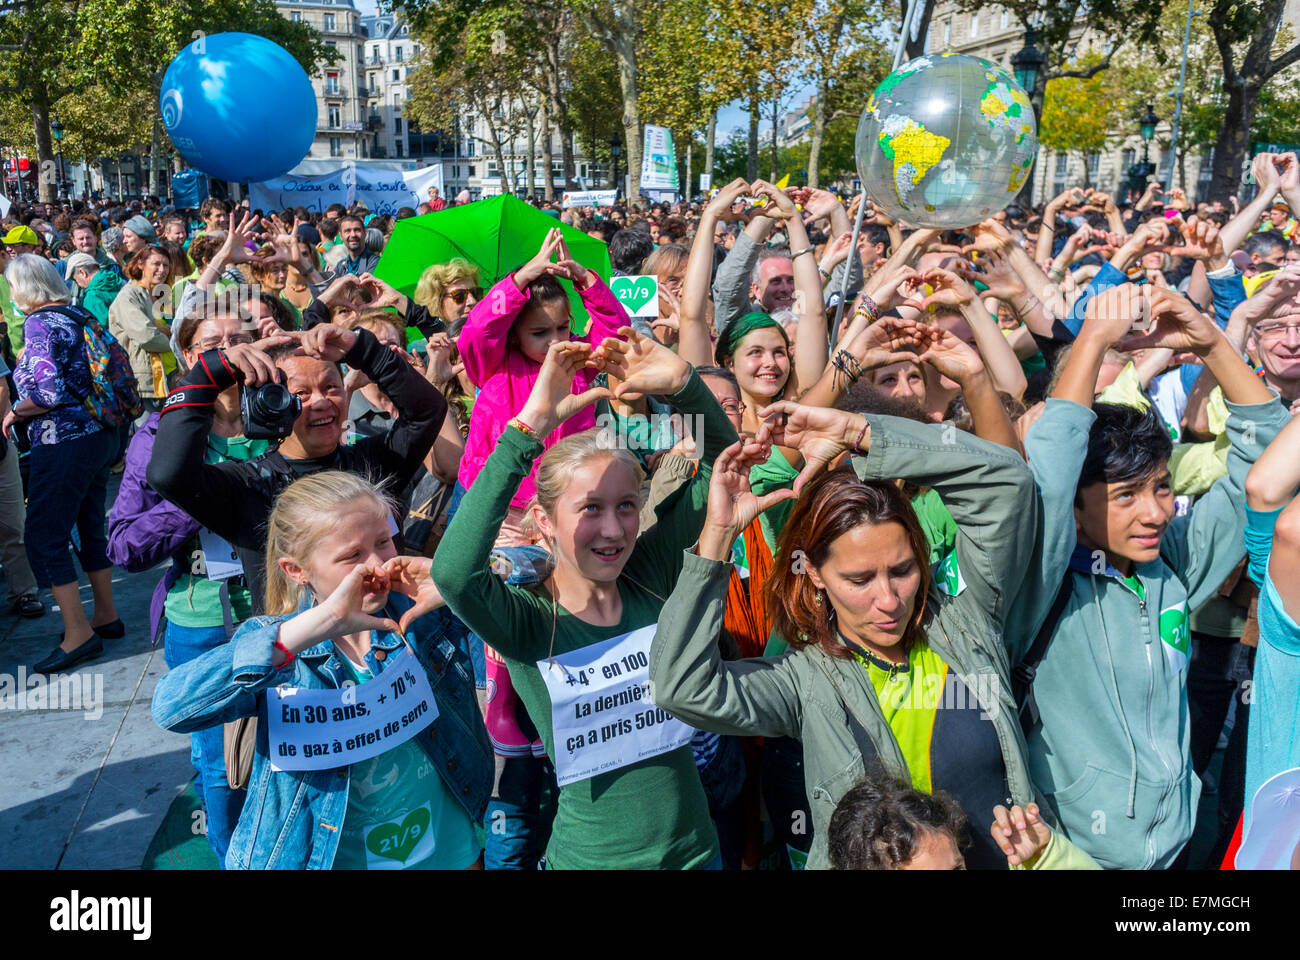 Paris, France. Crowd of Children, Teens on Street, Women Activists Making Heart Sign with Hands at Public Demonstration, International UN Climate Change March Protest international NGO, teenagers activist,  Paris COP 21, solidarity youth movement manifestation secondary school protesting Stock Photo